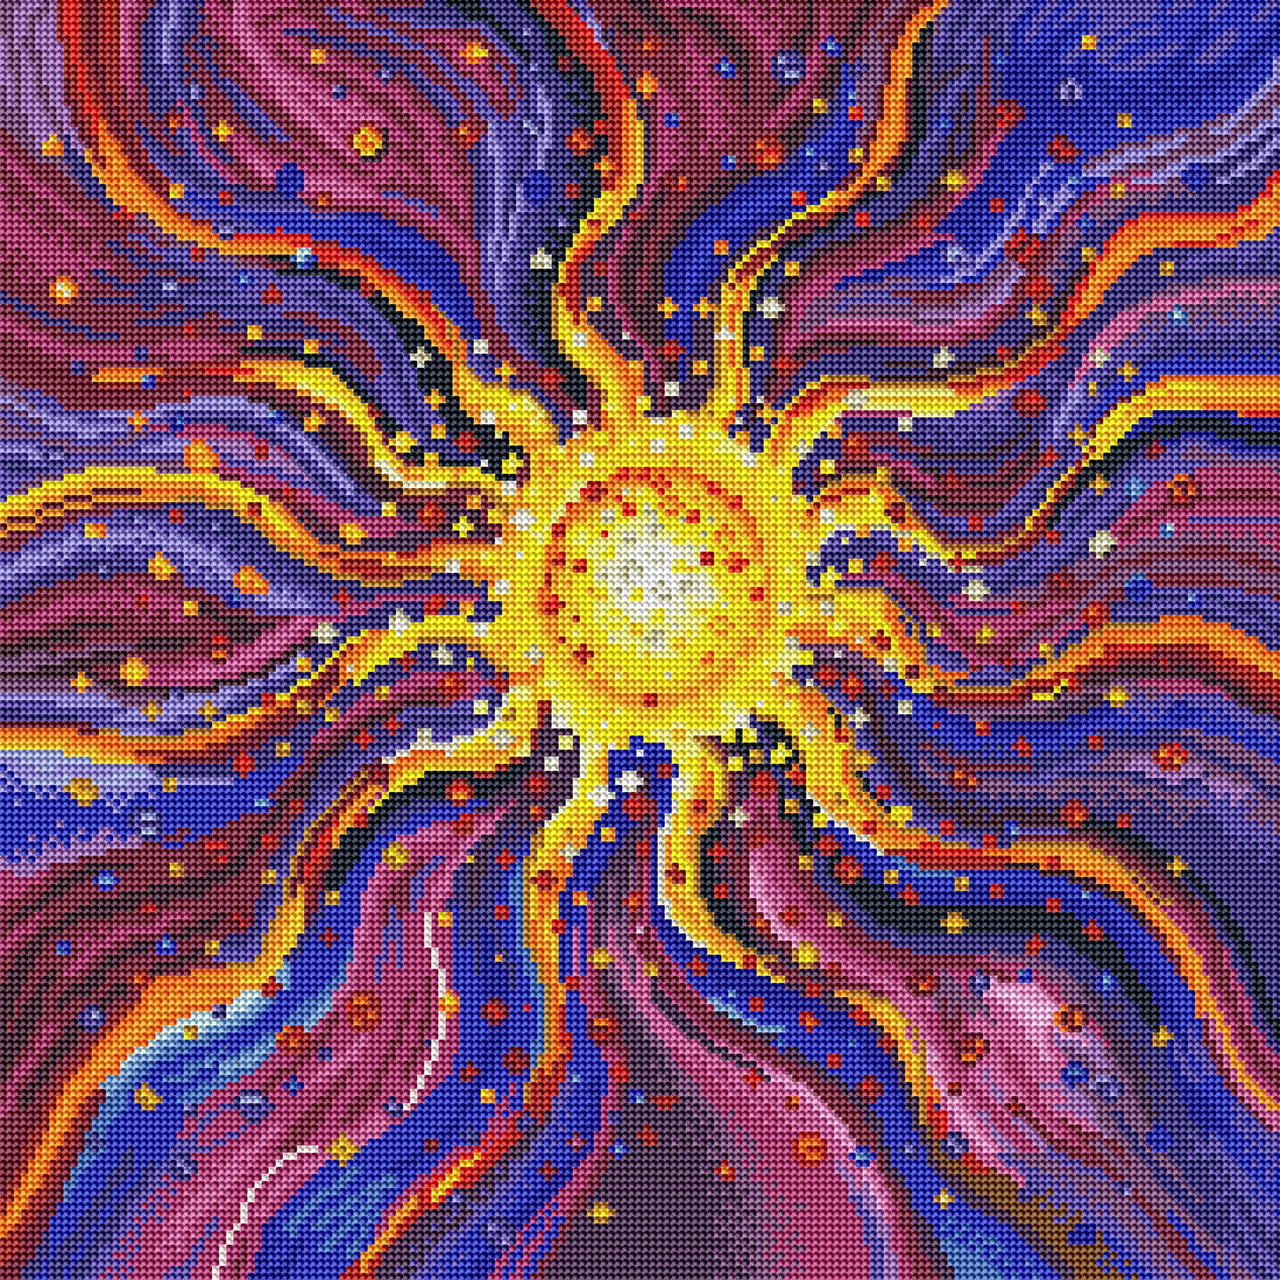 Diamond Painting El Sol 20" x 20" (50.7cm x 50.7cm) / Round with 35 Colors including 5 ABs / 32,761